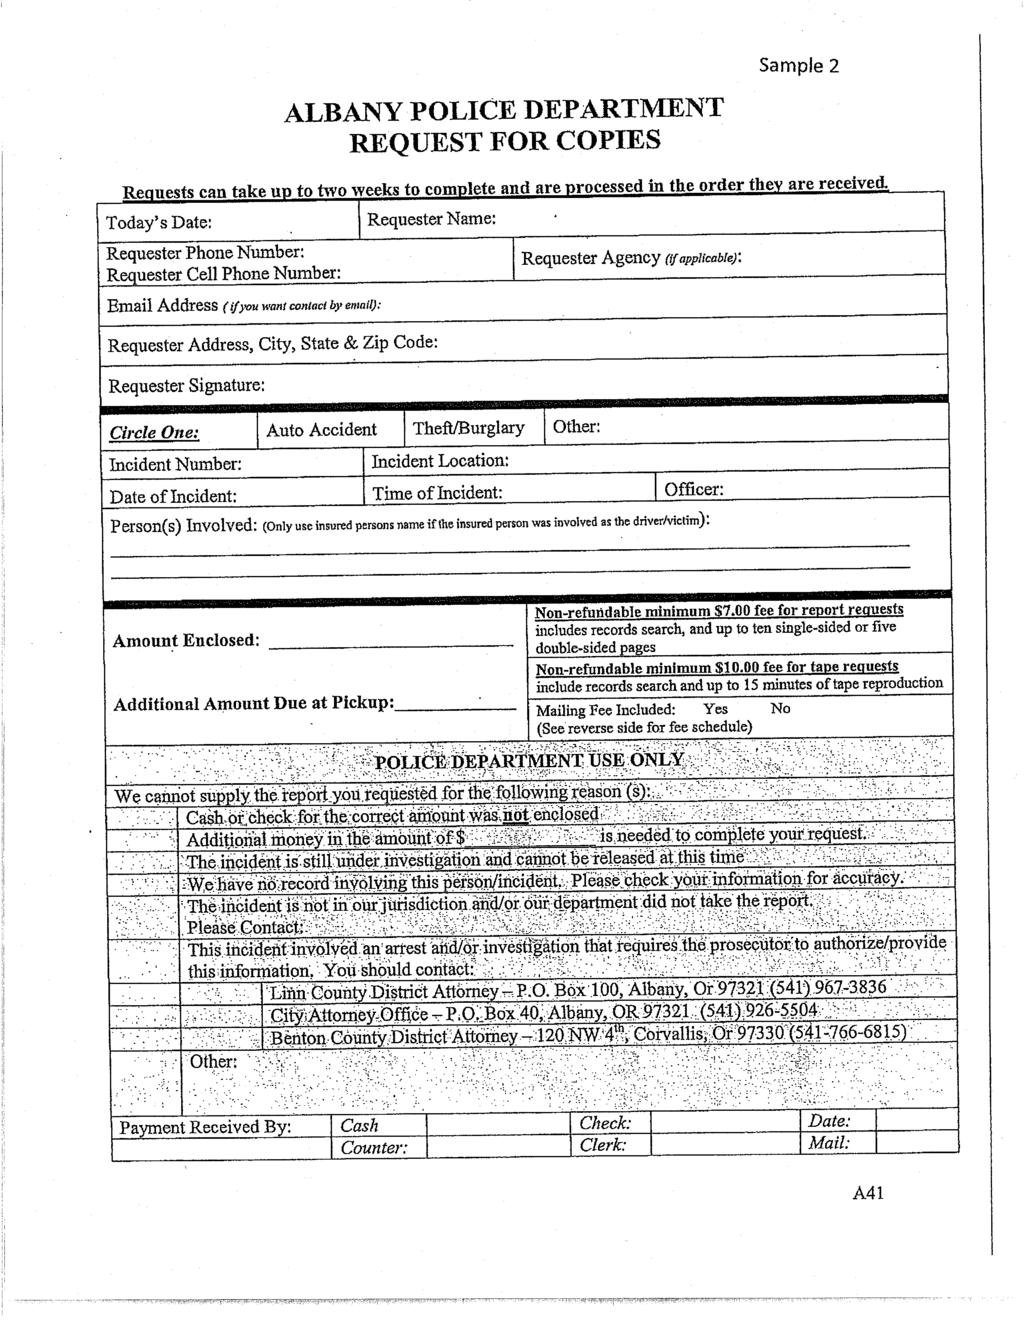 ALBANY POLICE DEPARTMENT REQUEST FOR COPIES Sample 2 Rennects can take up to two weeks to complete and are processed in the order they are received Today's Date: Requester Phone Number: Requester